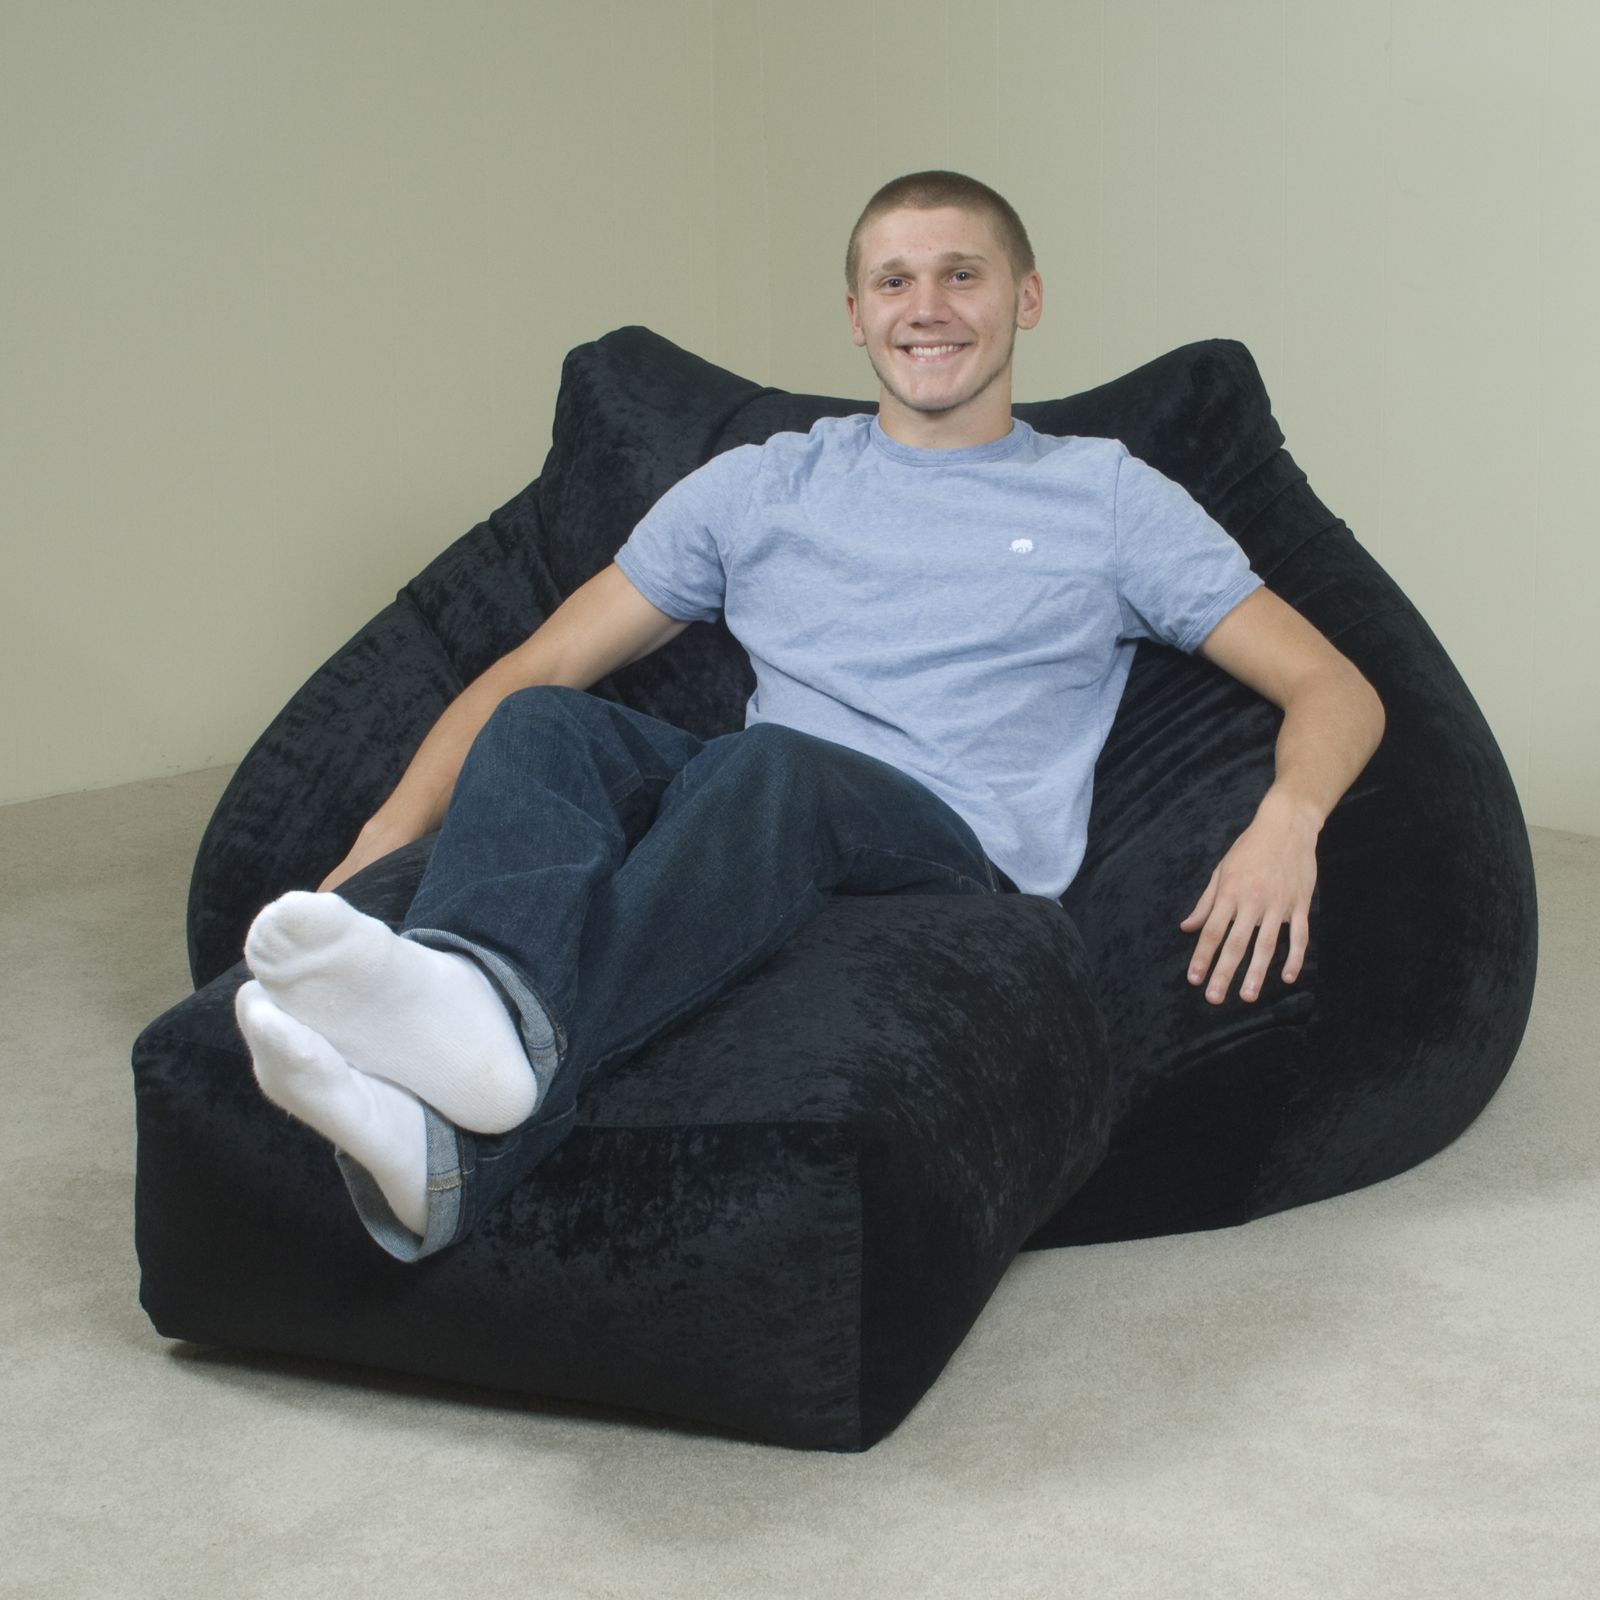 Oversized Bean Bag Chair For Adults